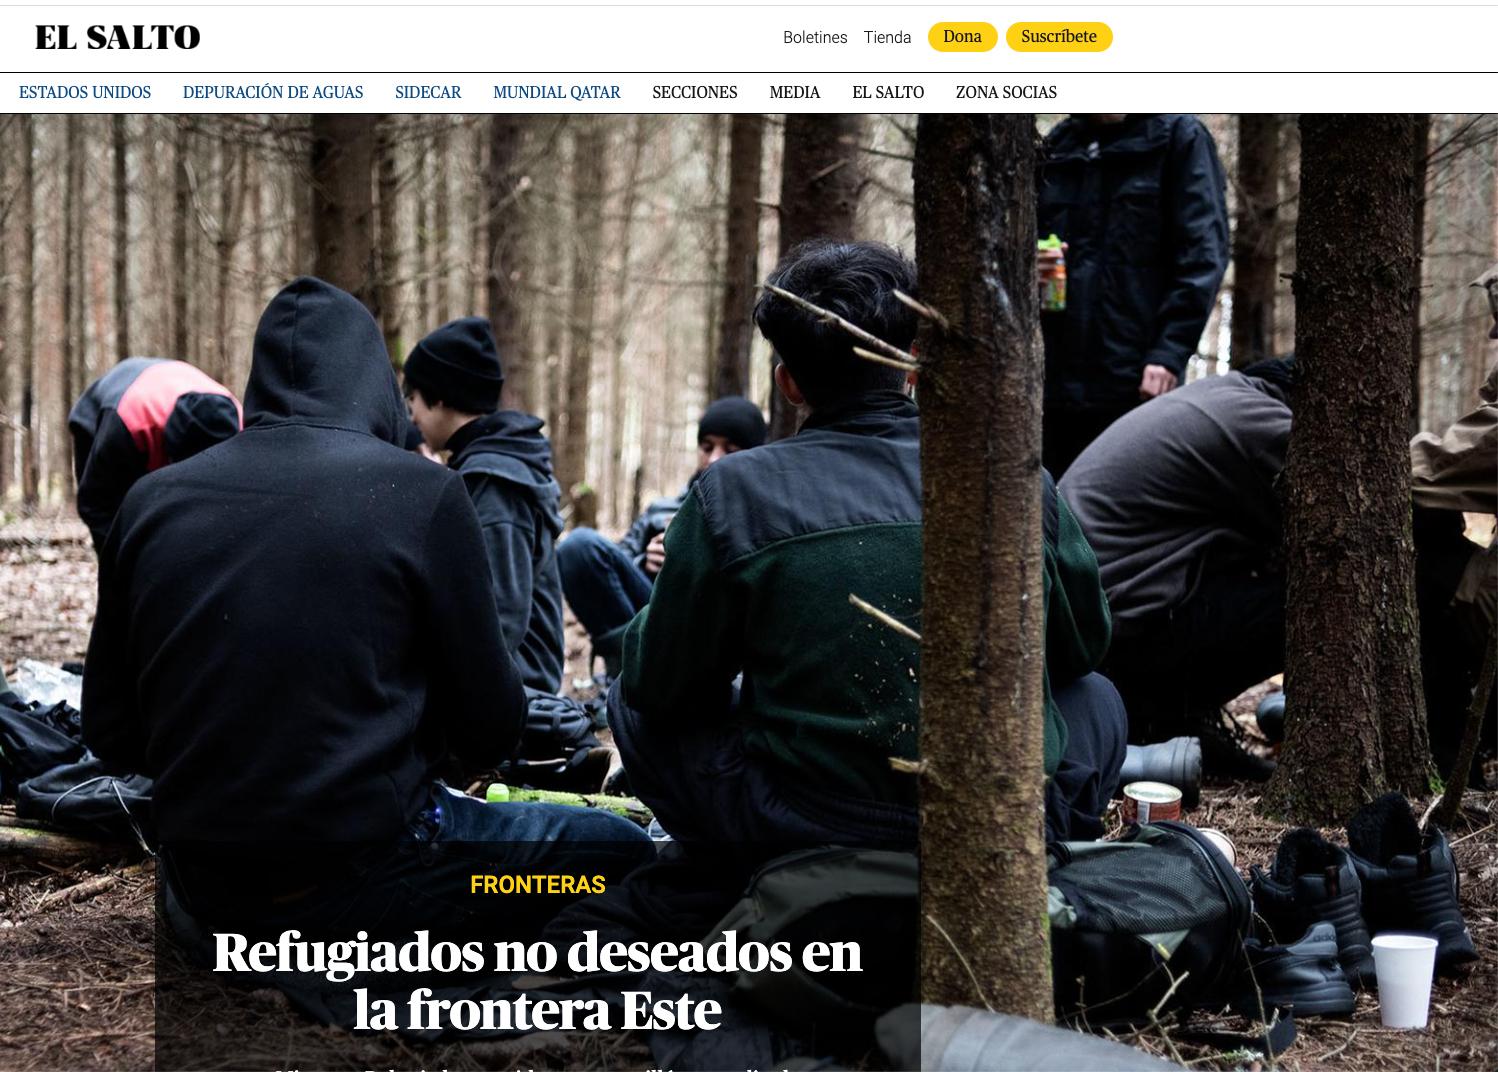 EL SALTO journal in Spain publishes my photoreportage about refugees in the Bialowieza Forest